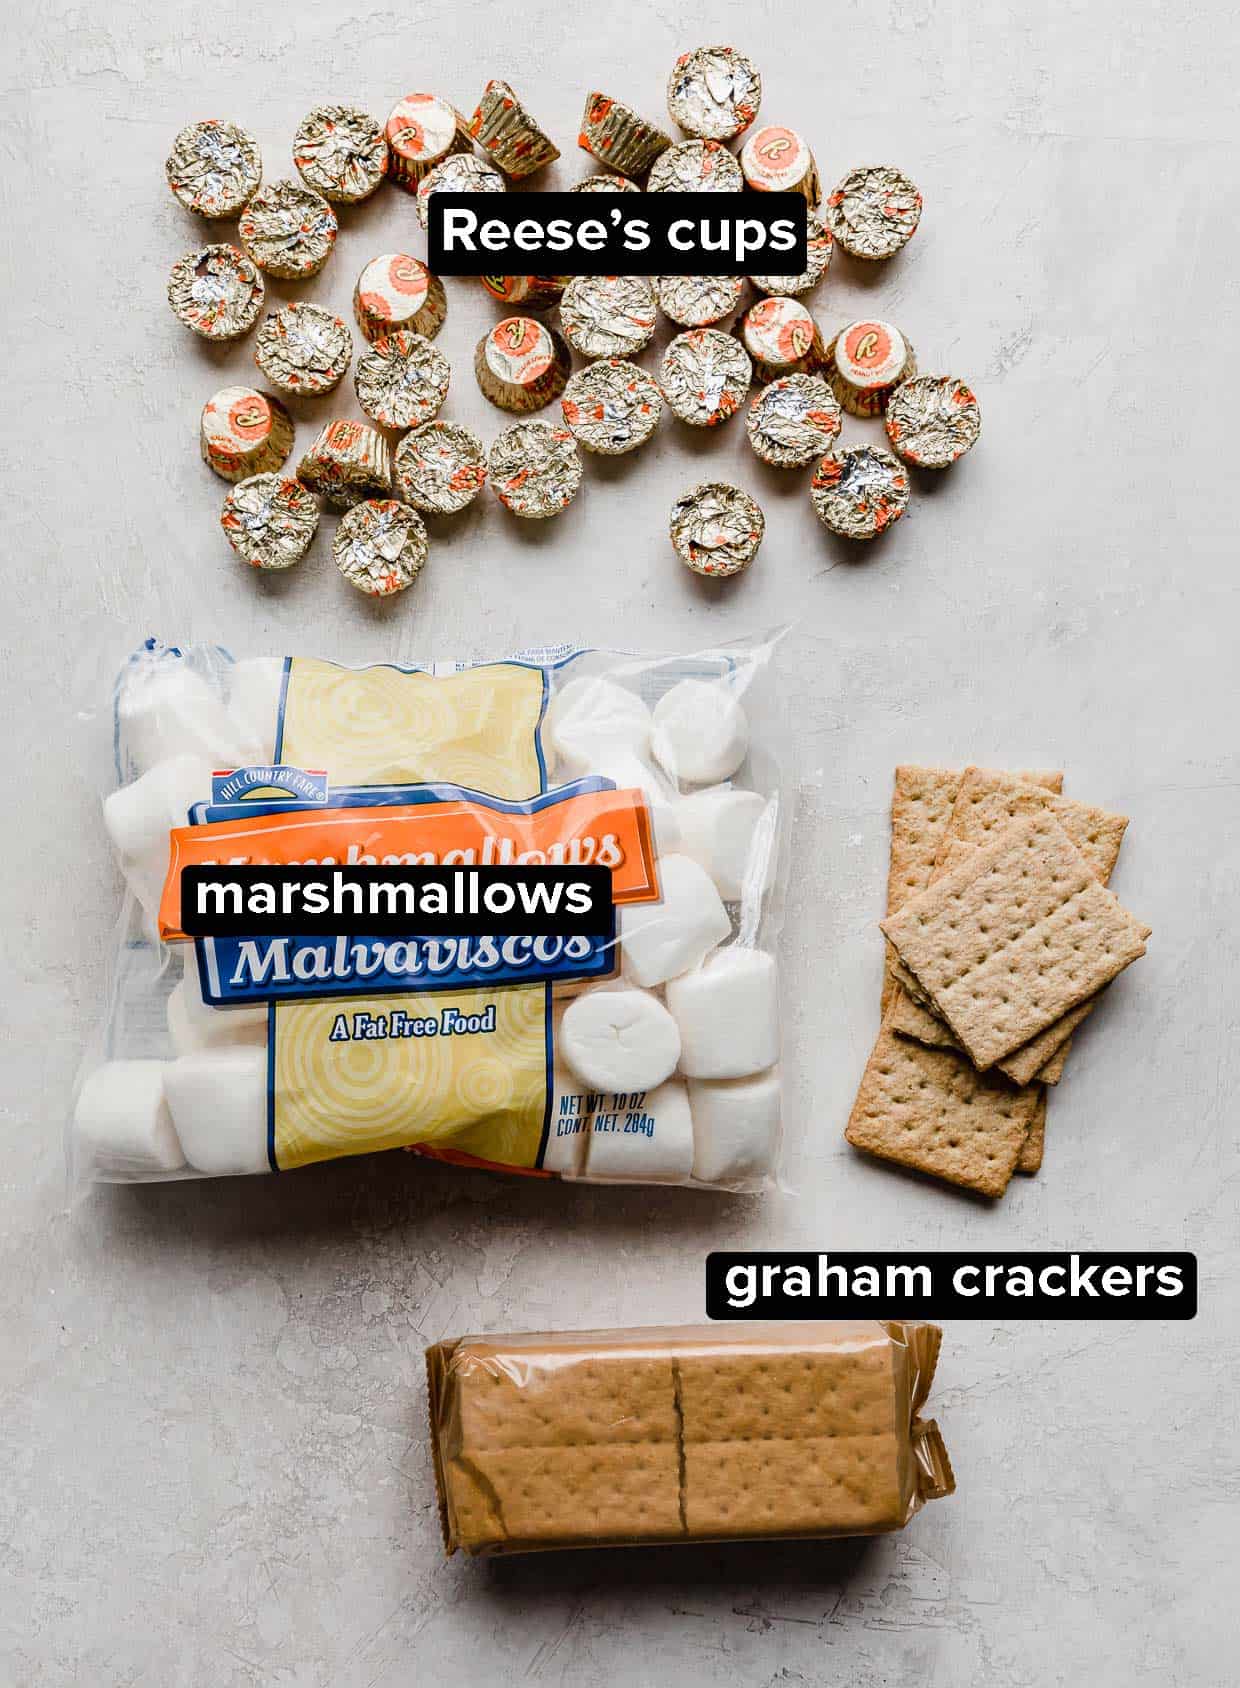 Ingredients used to make Reese's S'mores on a white background.